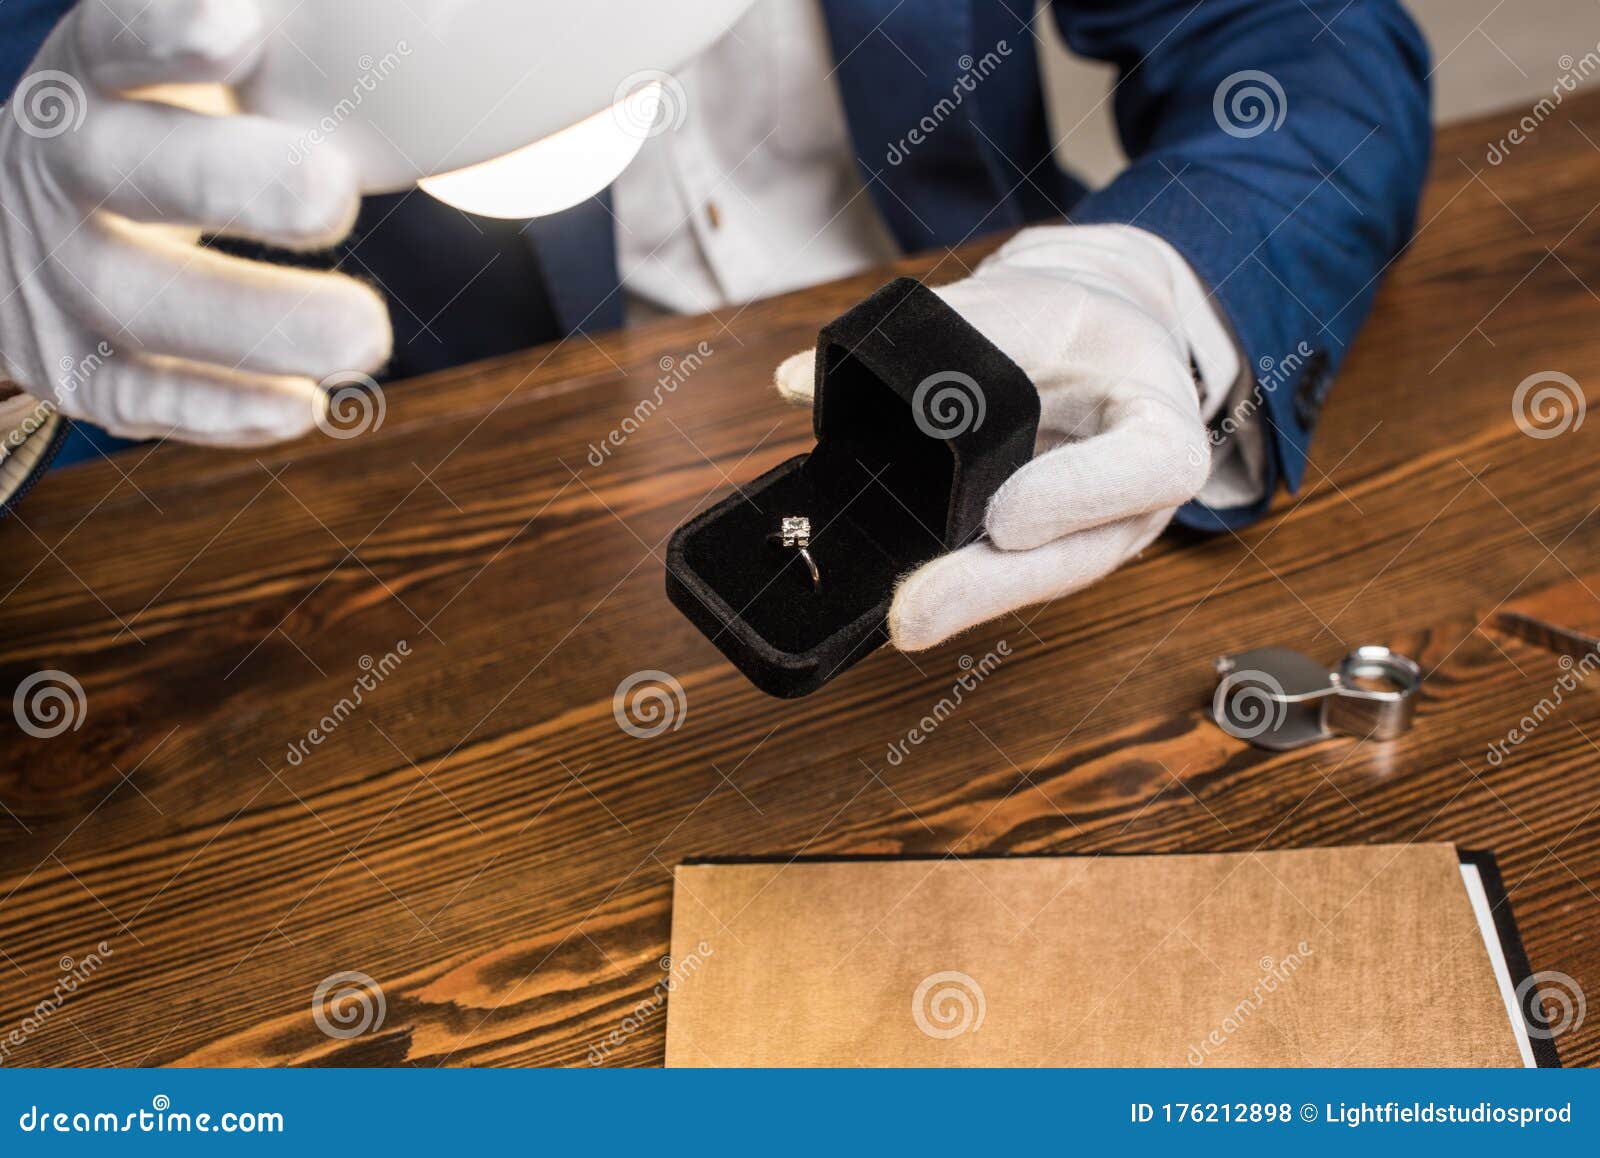 View Of Jewelry Appraiser Holding Ring Stock Photo - Image ...